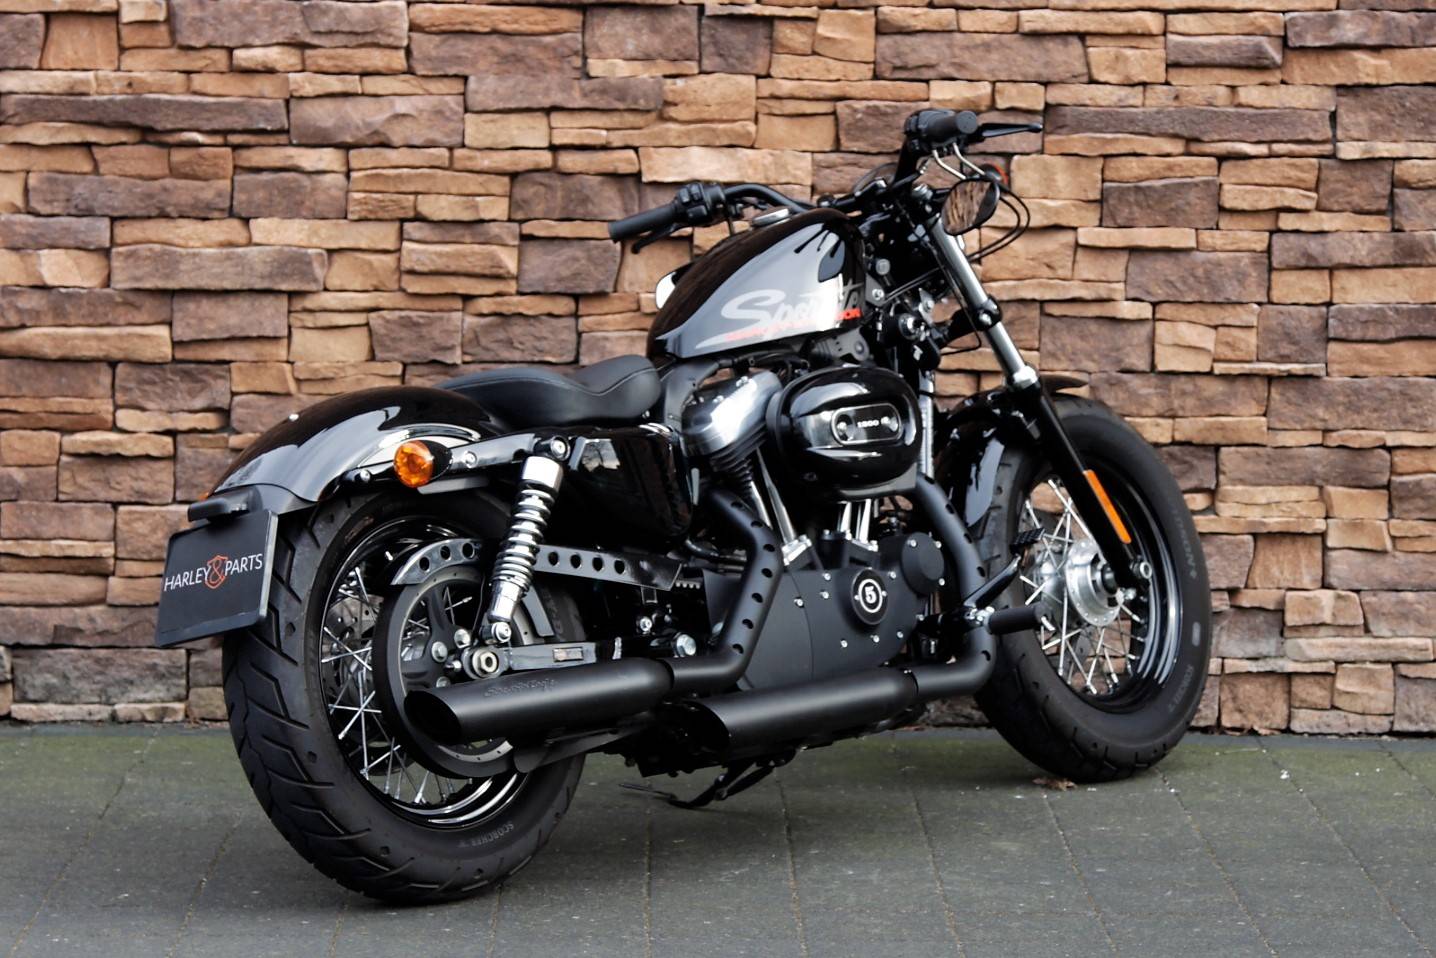 Xl 1200xs forty-eight special 2019